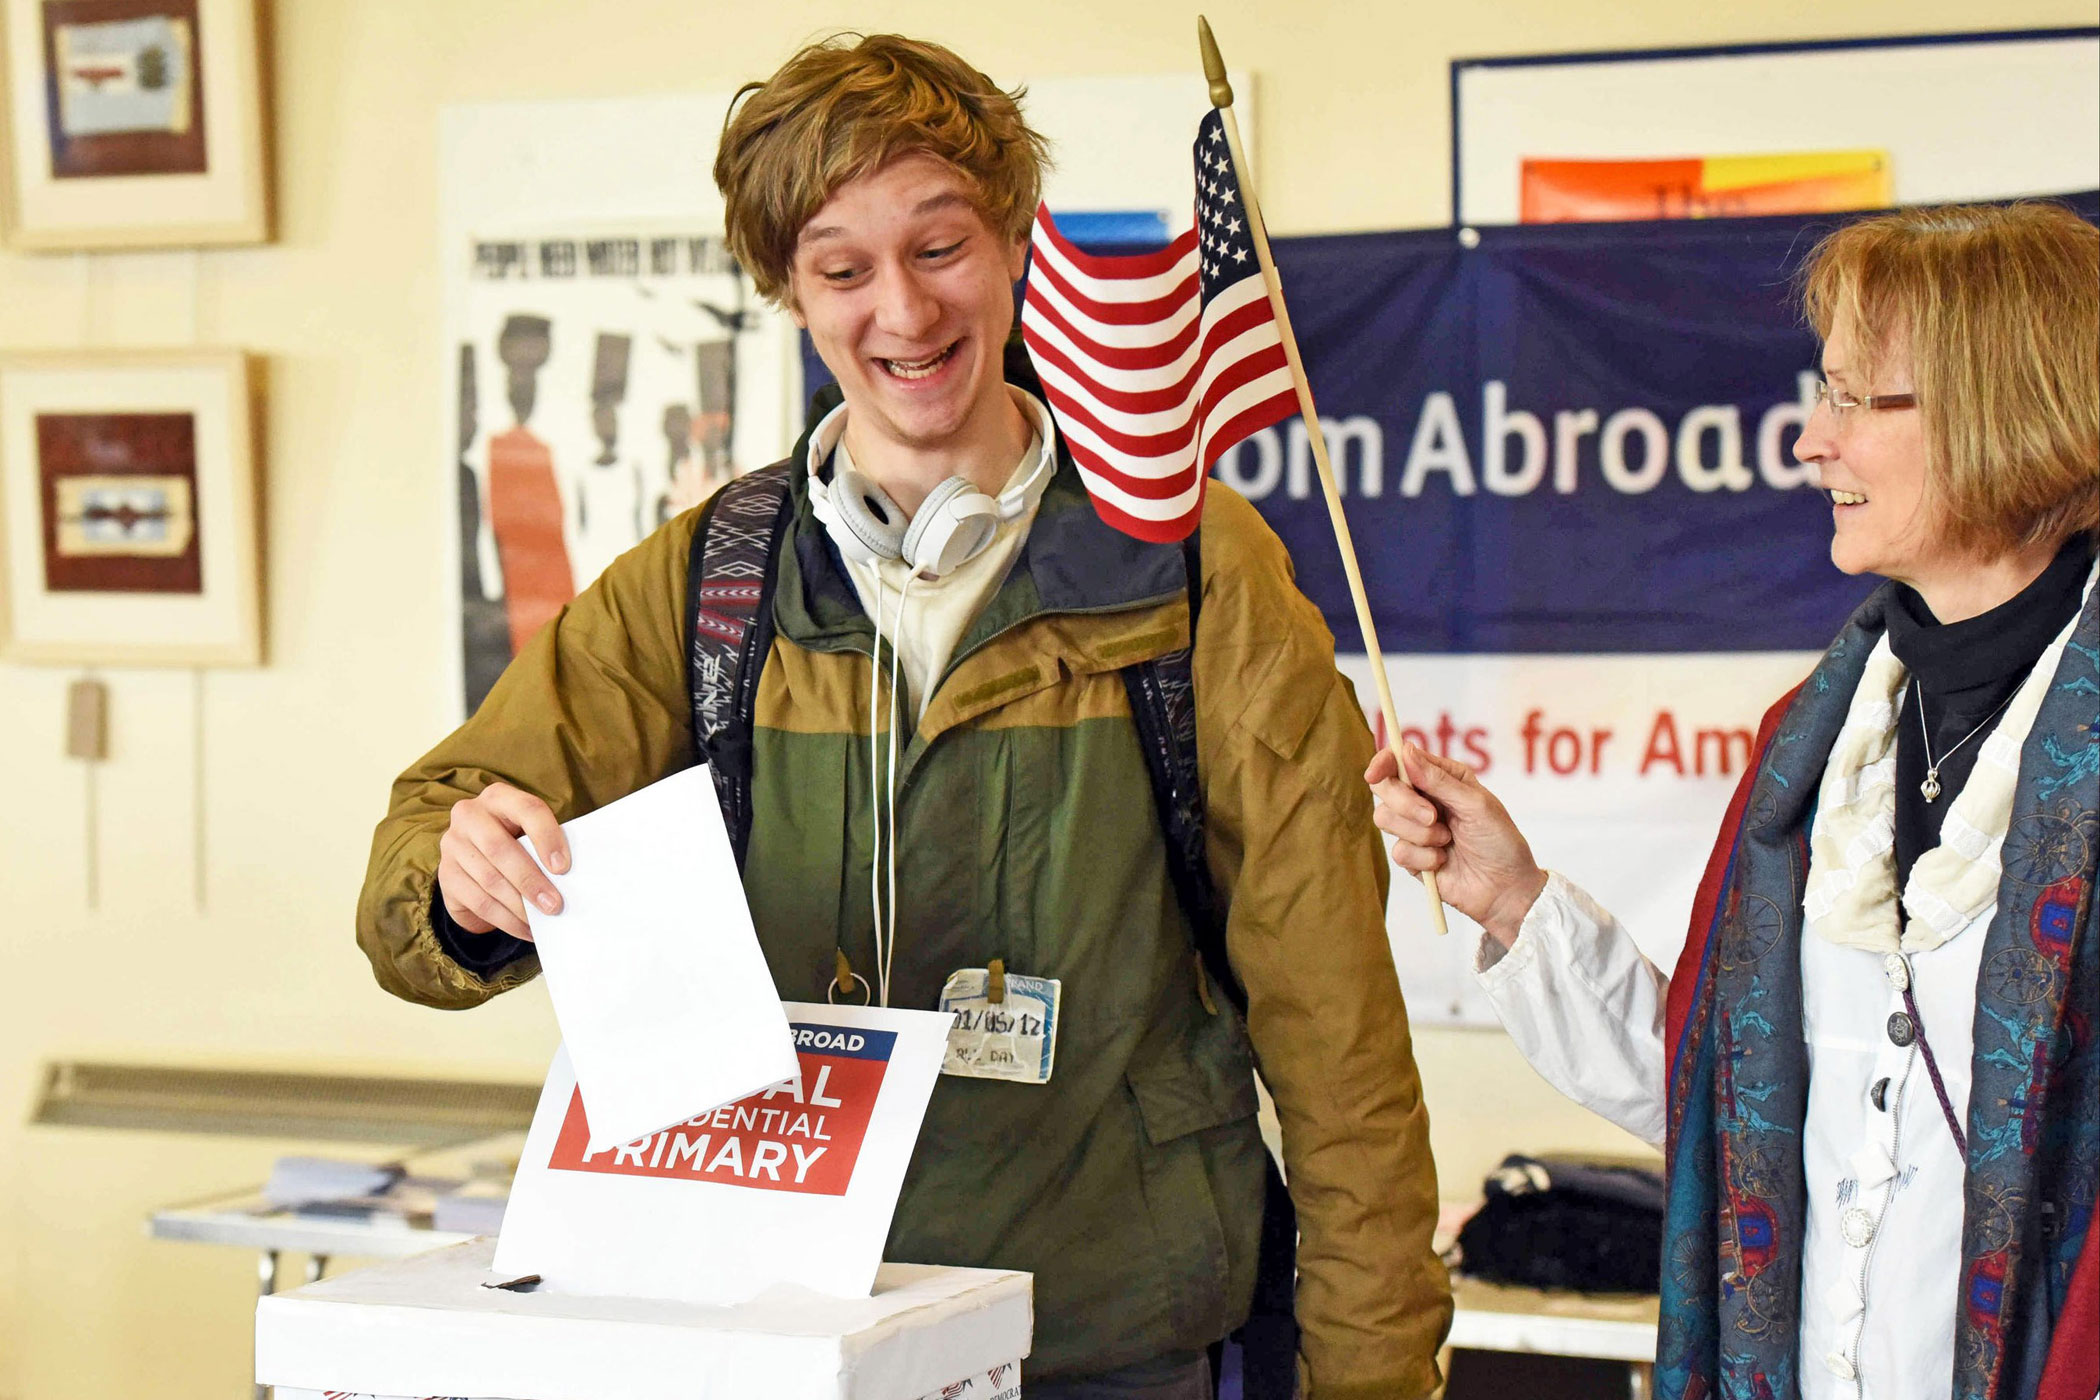 As Super Tuesday gets under way in United States presidential primary race, an American voter casts his ballot in Edinburgh, Scotland in the global presidential primary, a Democratic effort that allows Americans overseas to help choose delegates.